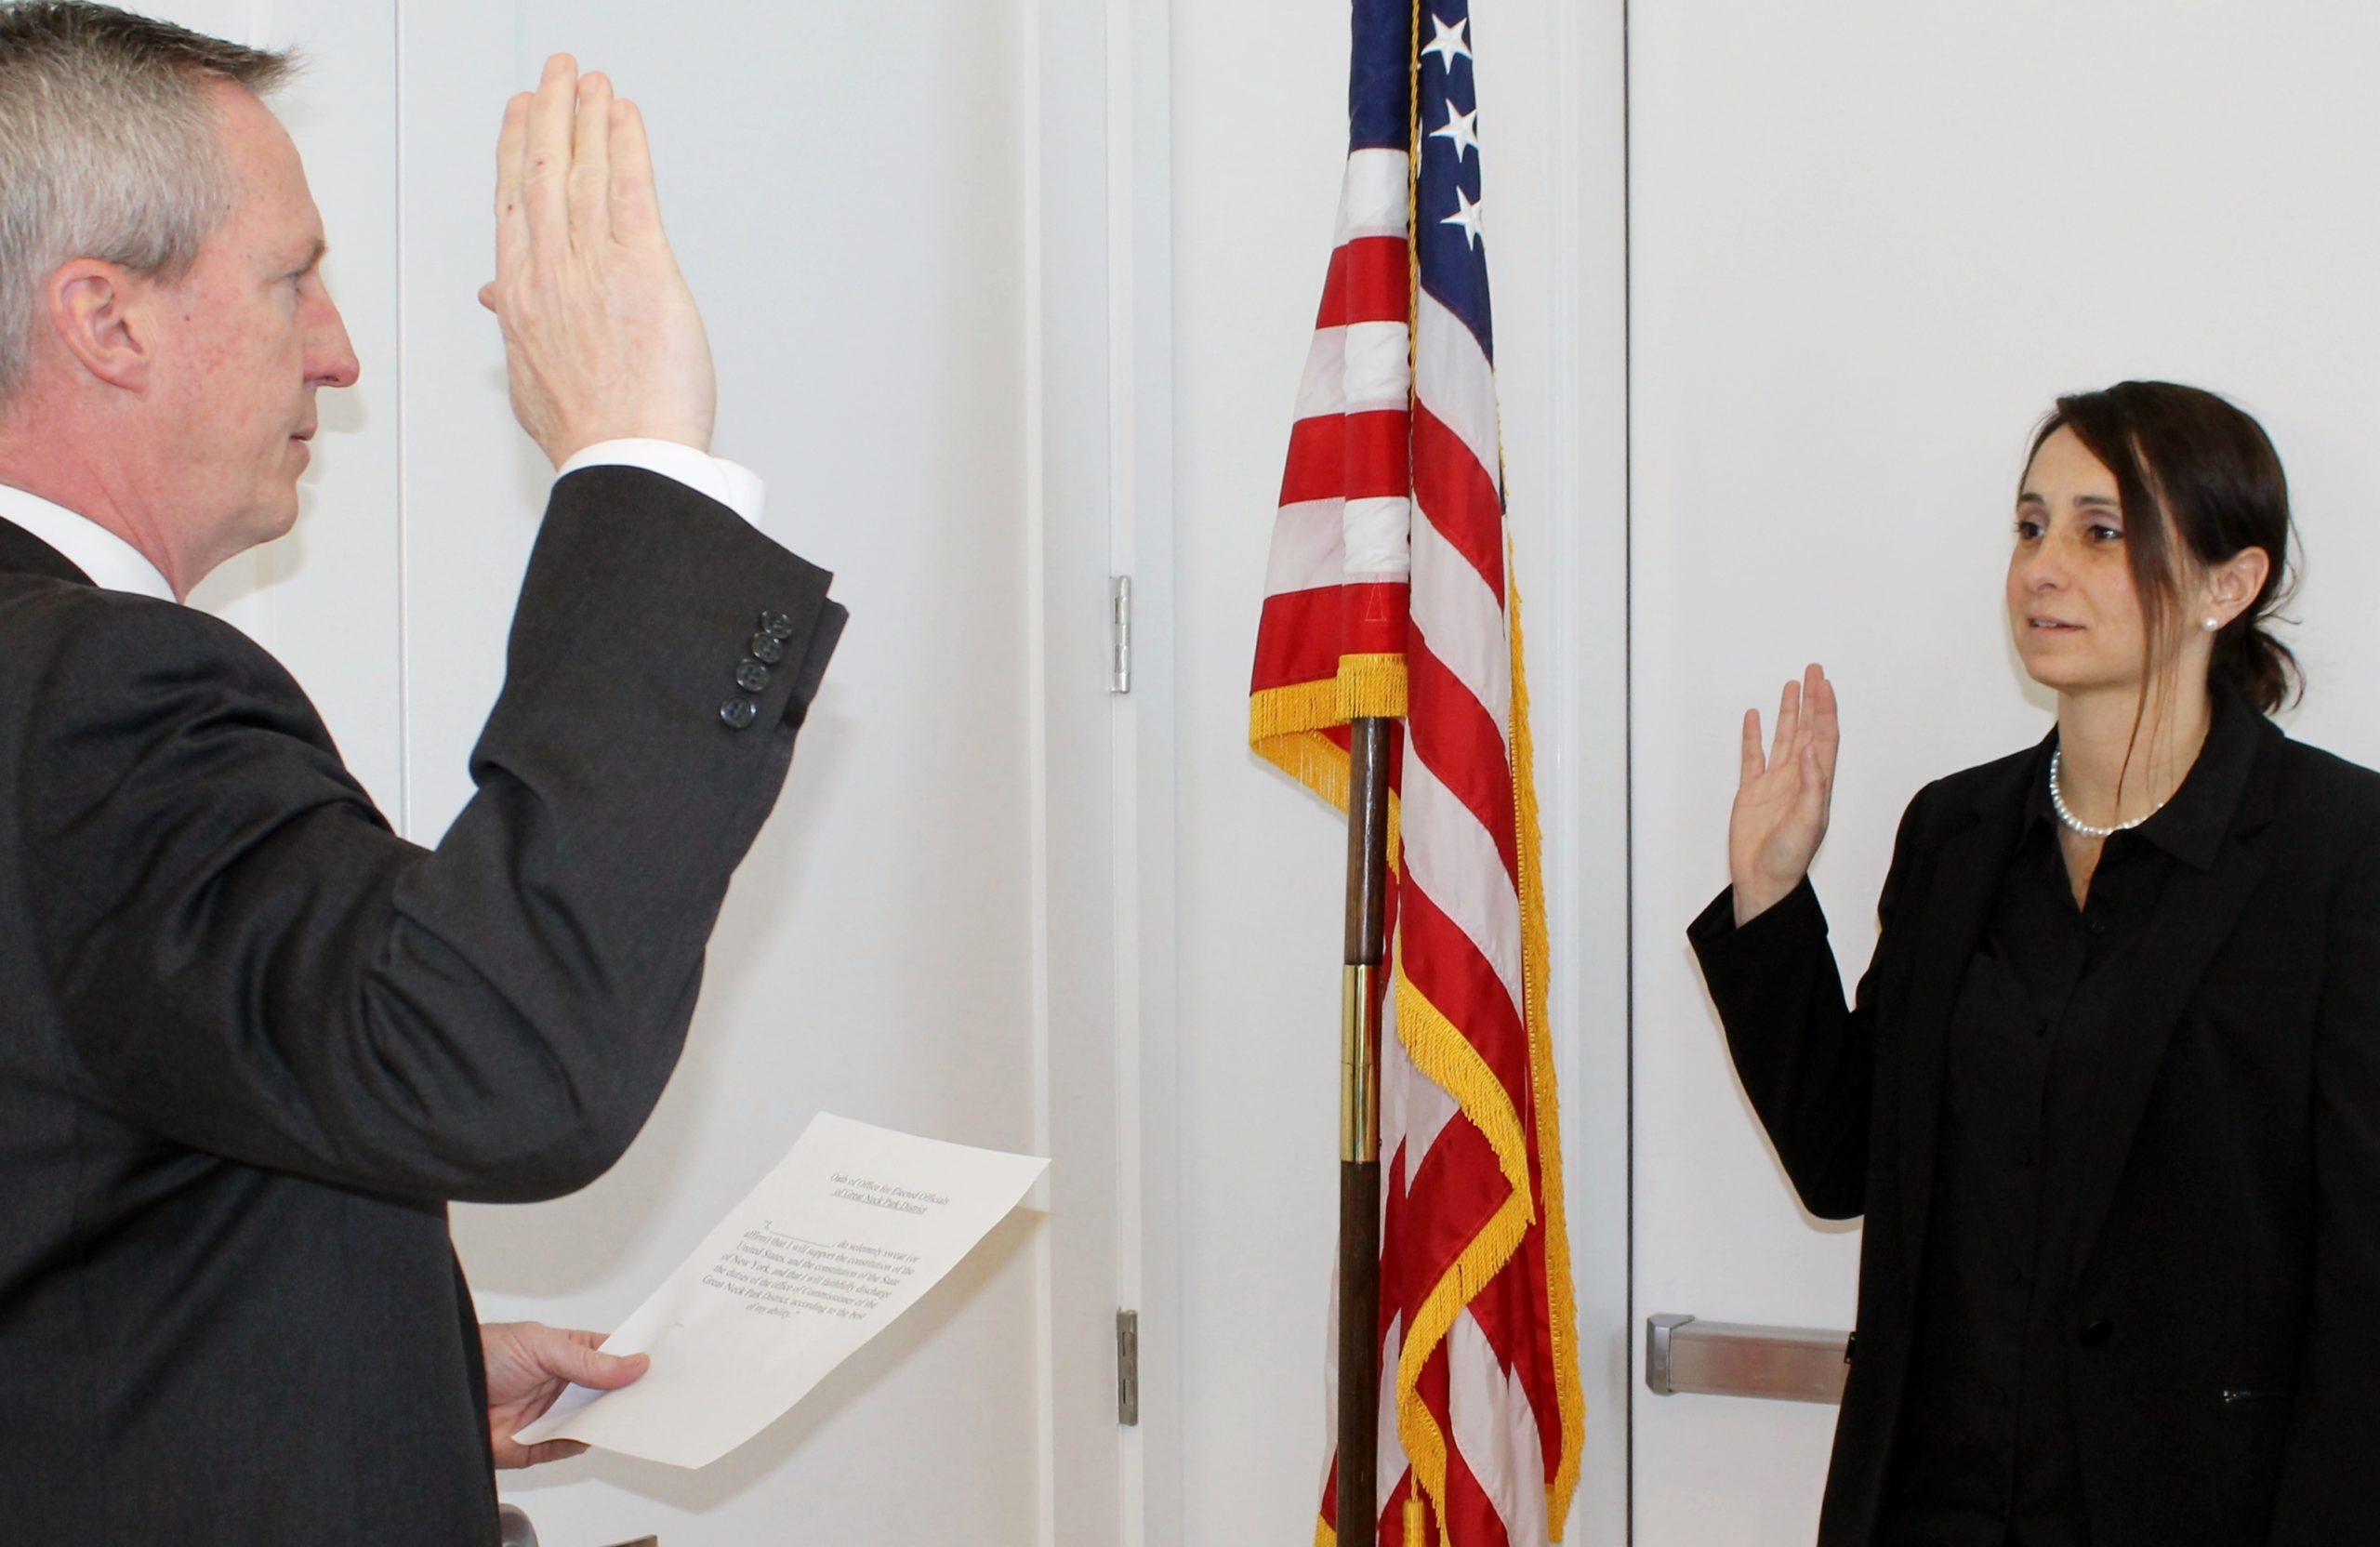 Christopher Prior swears in Tina Stellato as Park Commissioner. (Photo courtesy of the Great Neck Park Distriction)